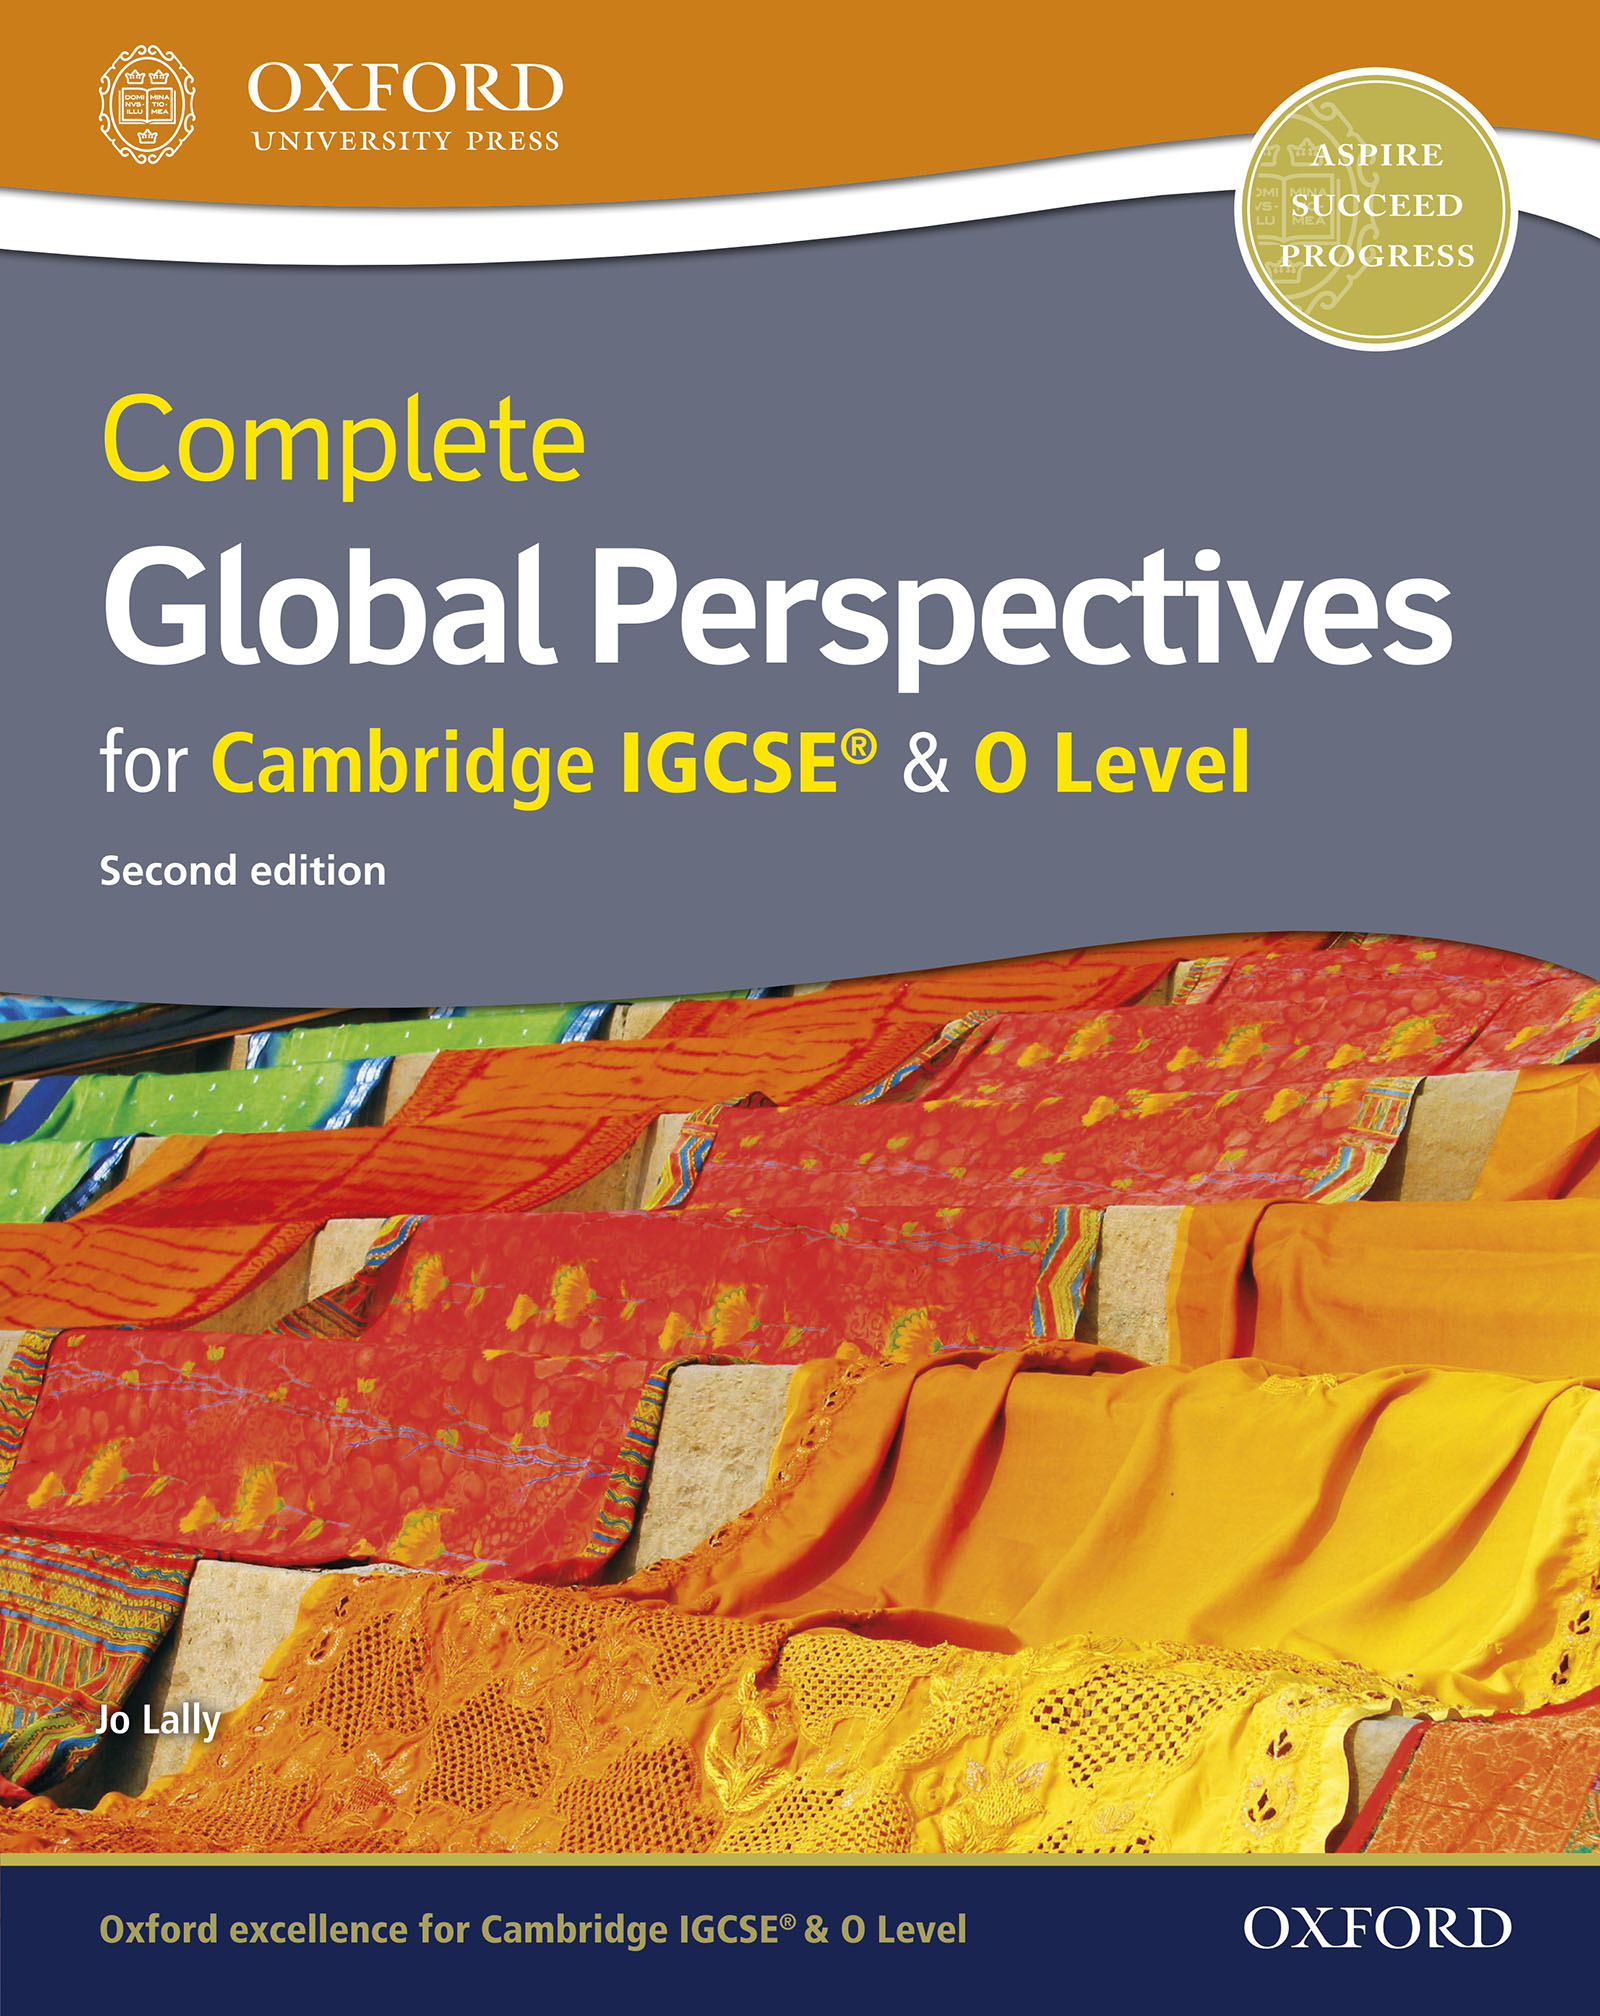 Complete Global Perspectives for Cambridge IGCSE and O Level